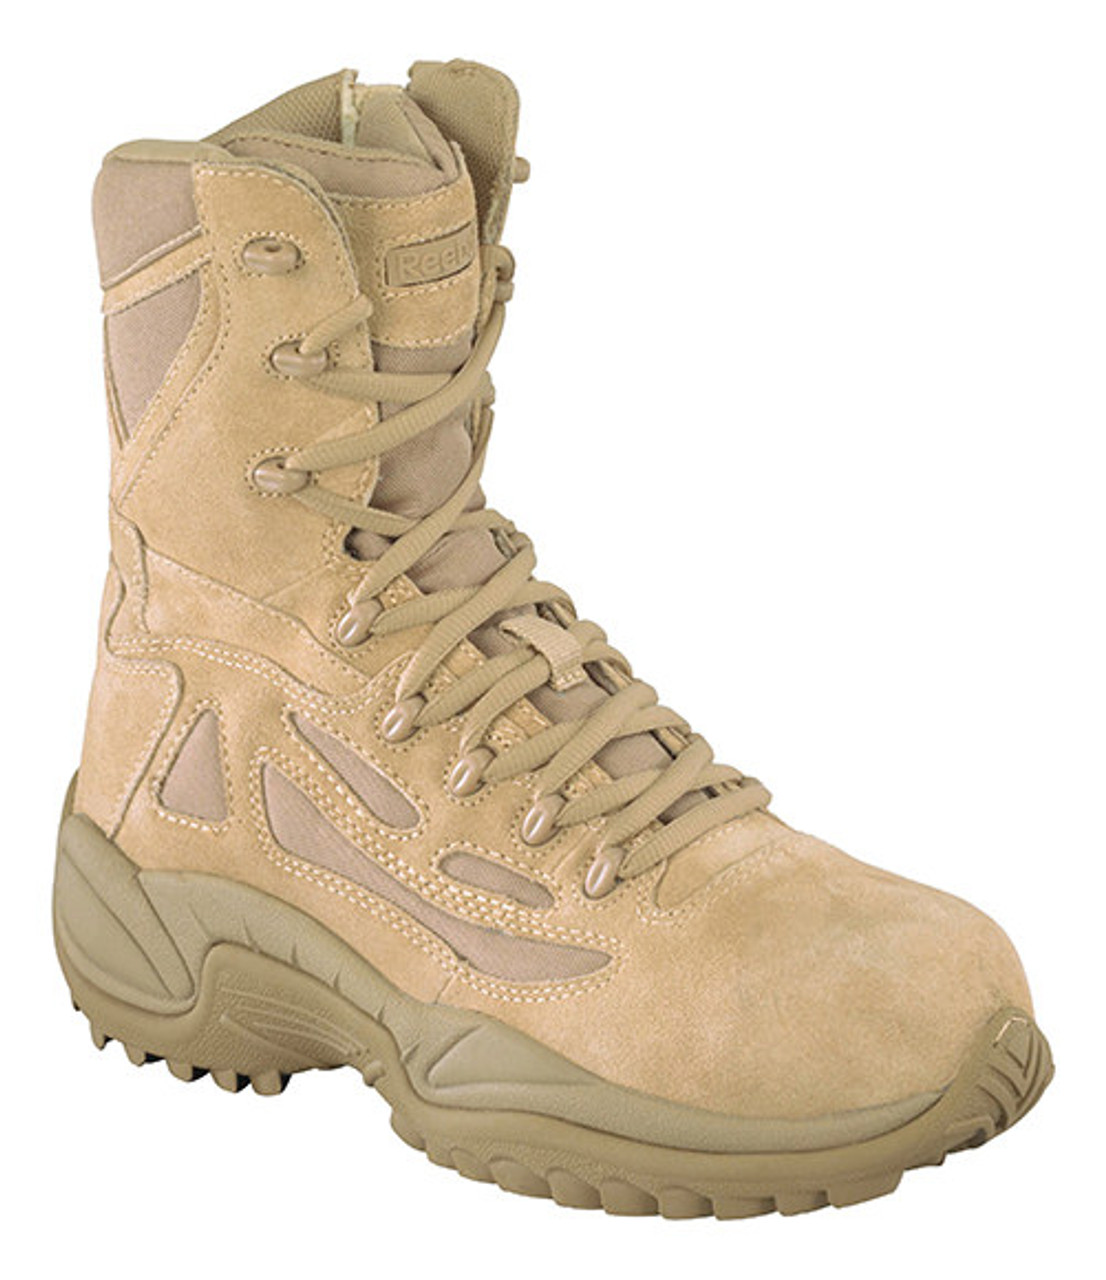 tactical safety toe boots